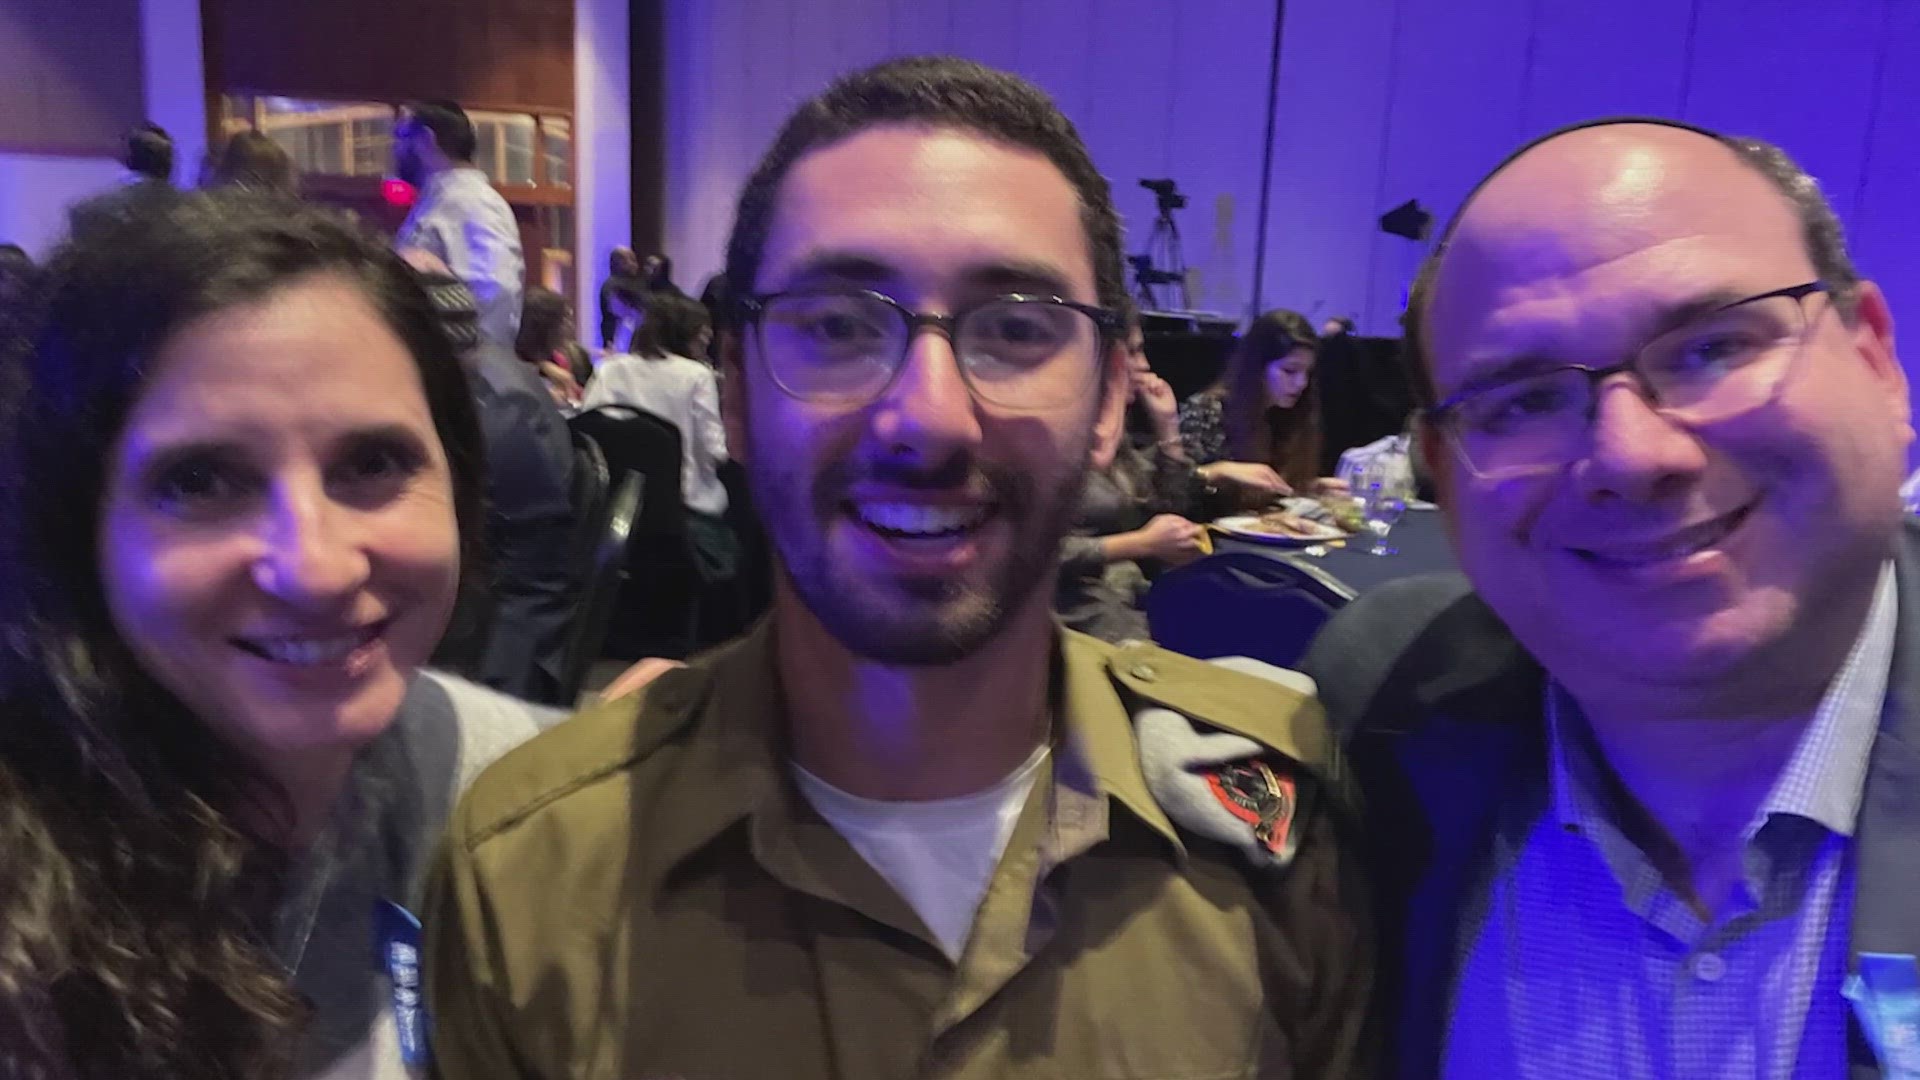 A Houston-area Jewish family had a loved one who moved to Israel and is now been called to active duty in the military.